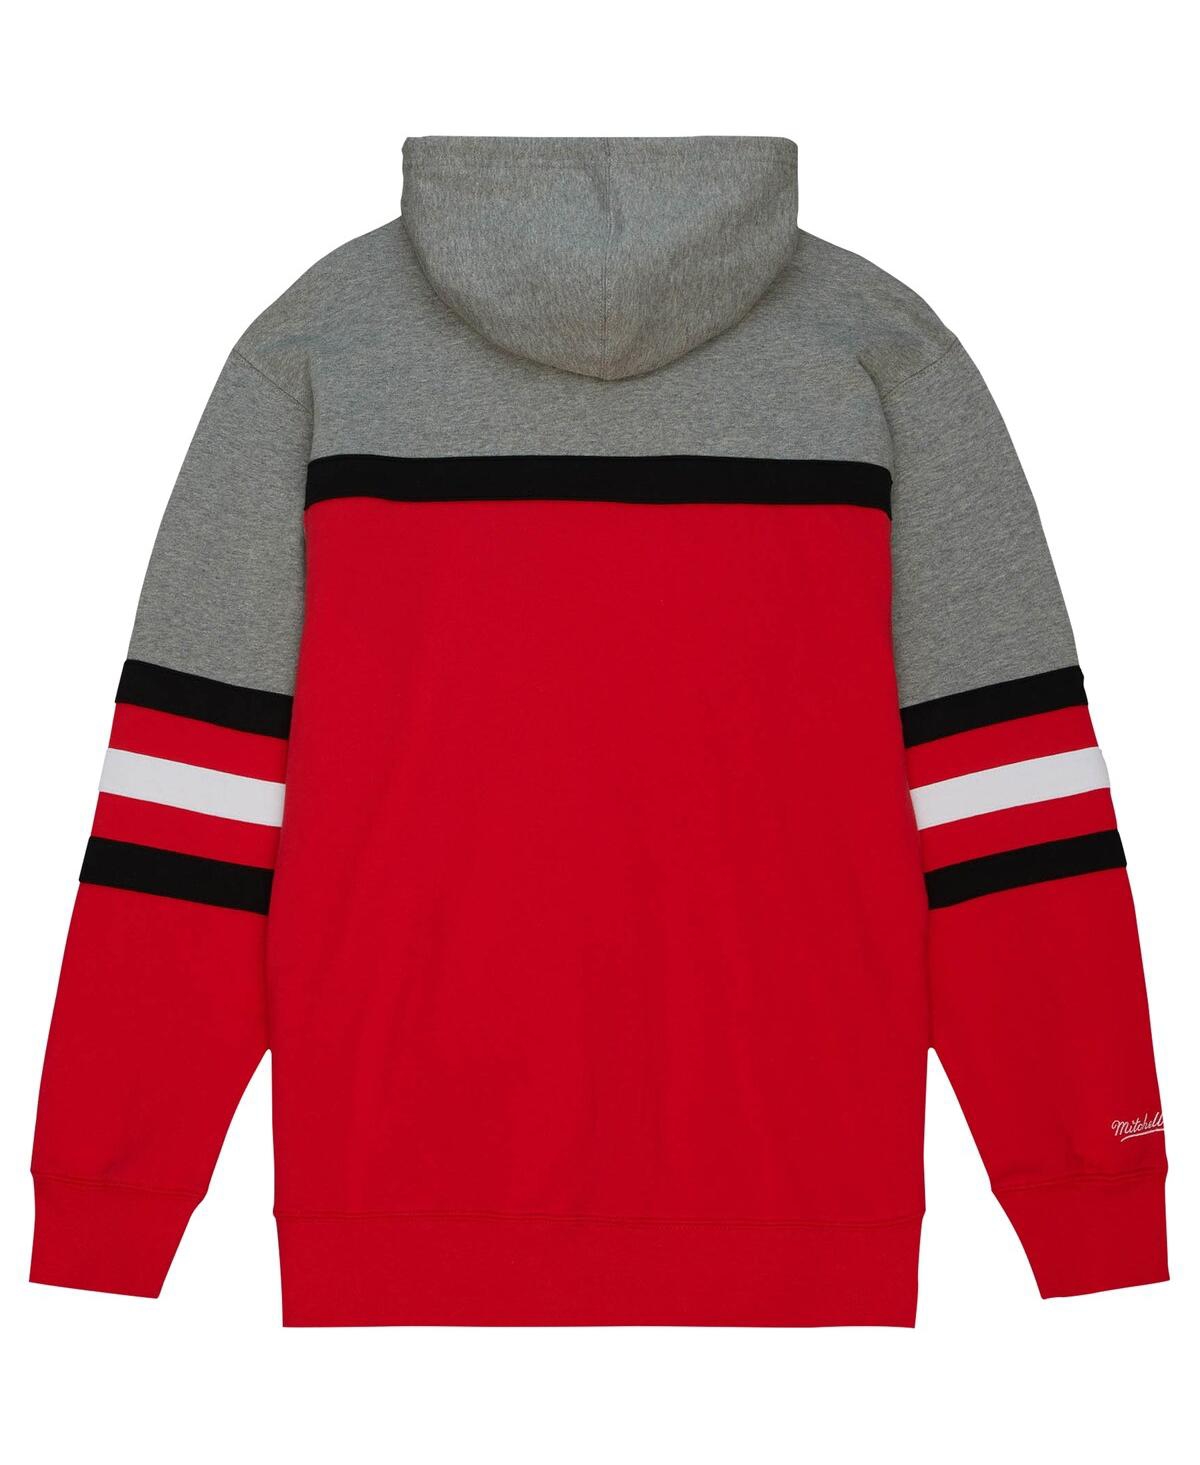 Shop Mitchell & Ness Men's  Red Maryland Terrapins Head Coach Pullover Hoodie